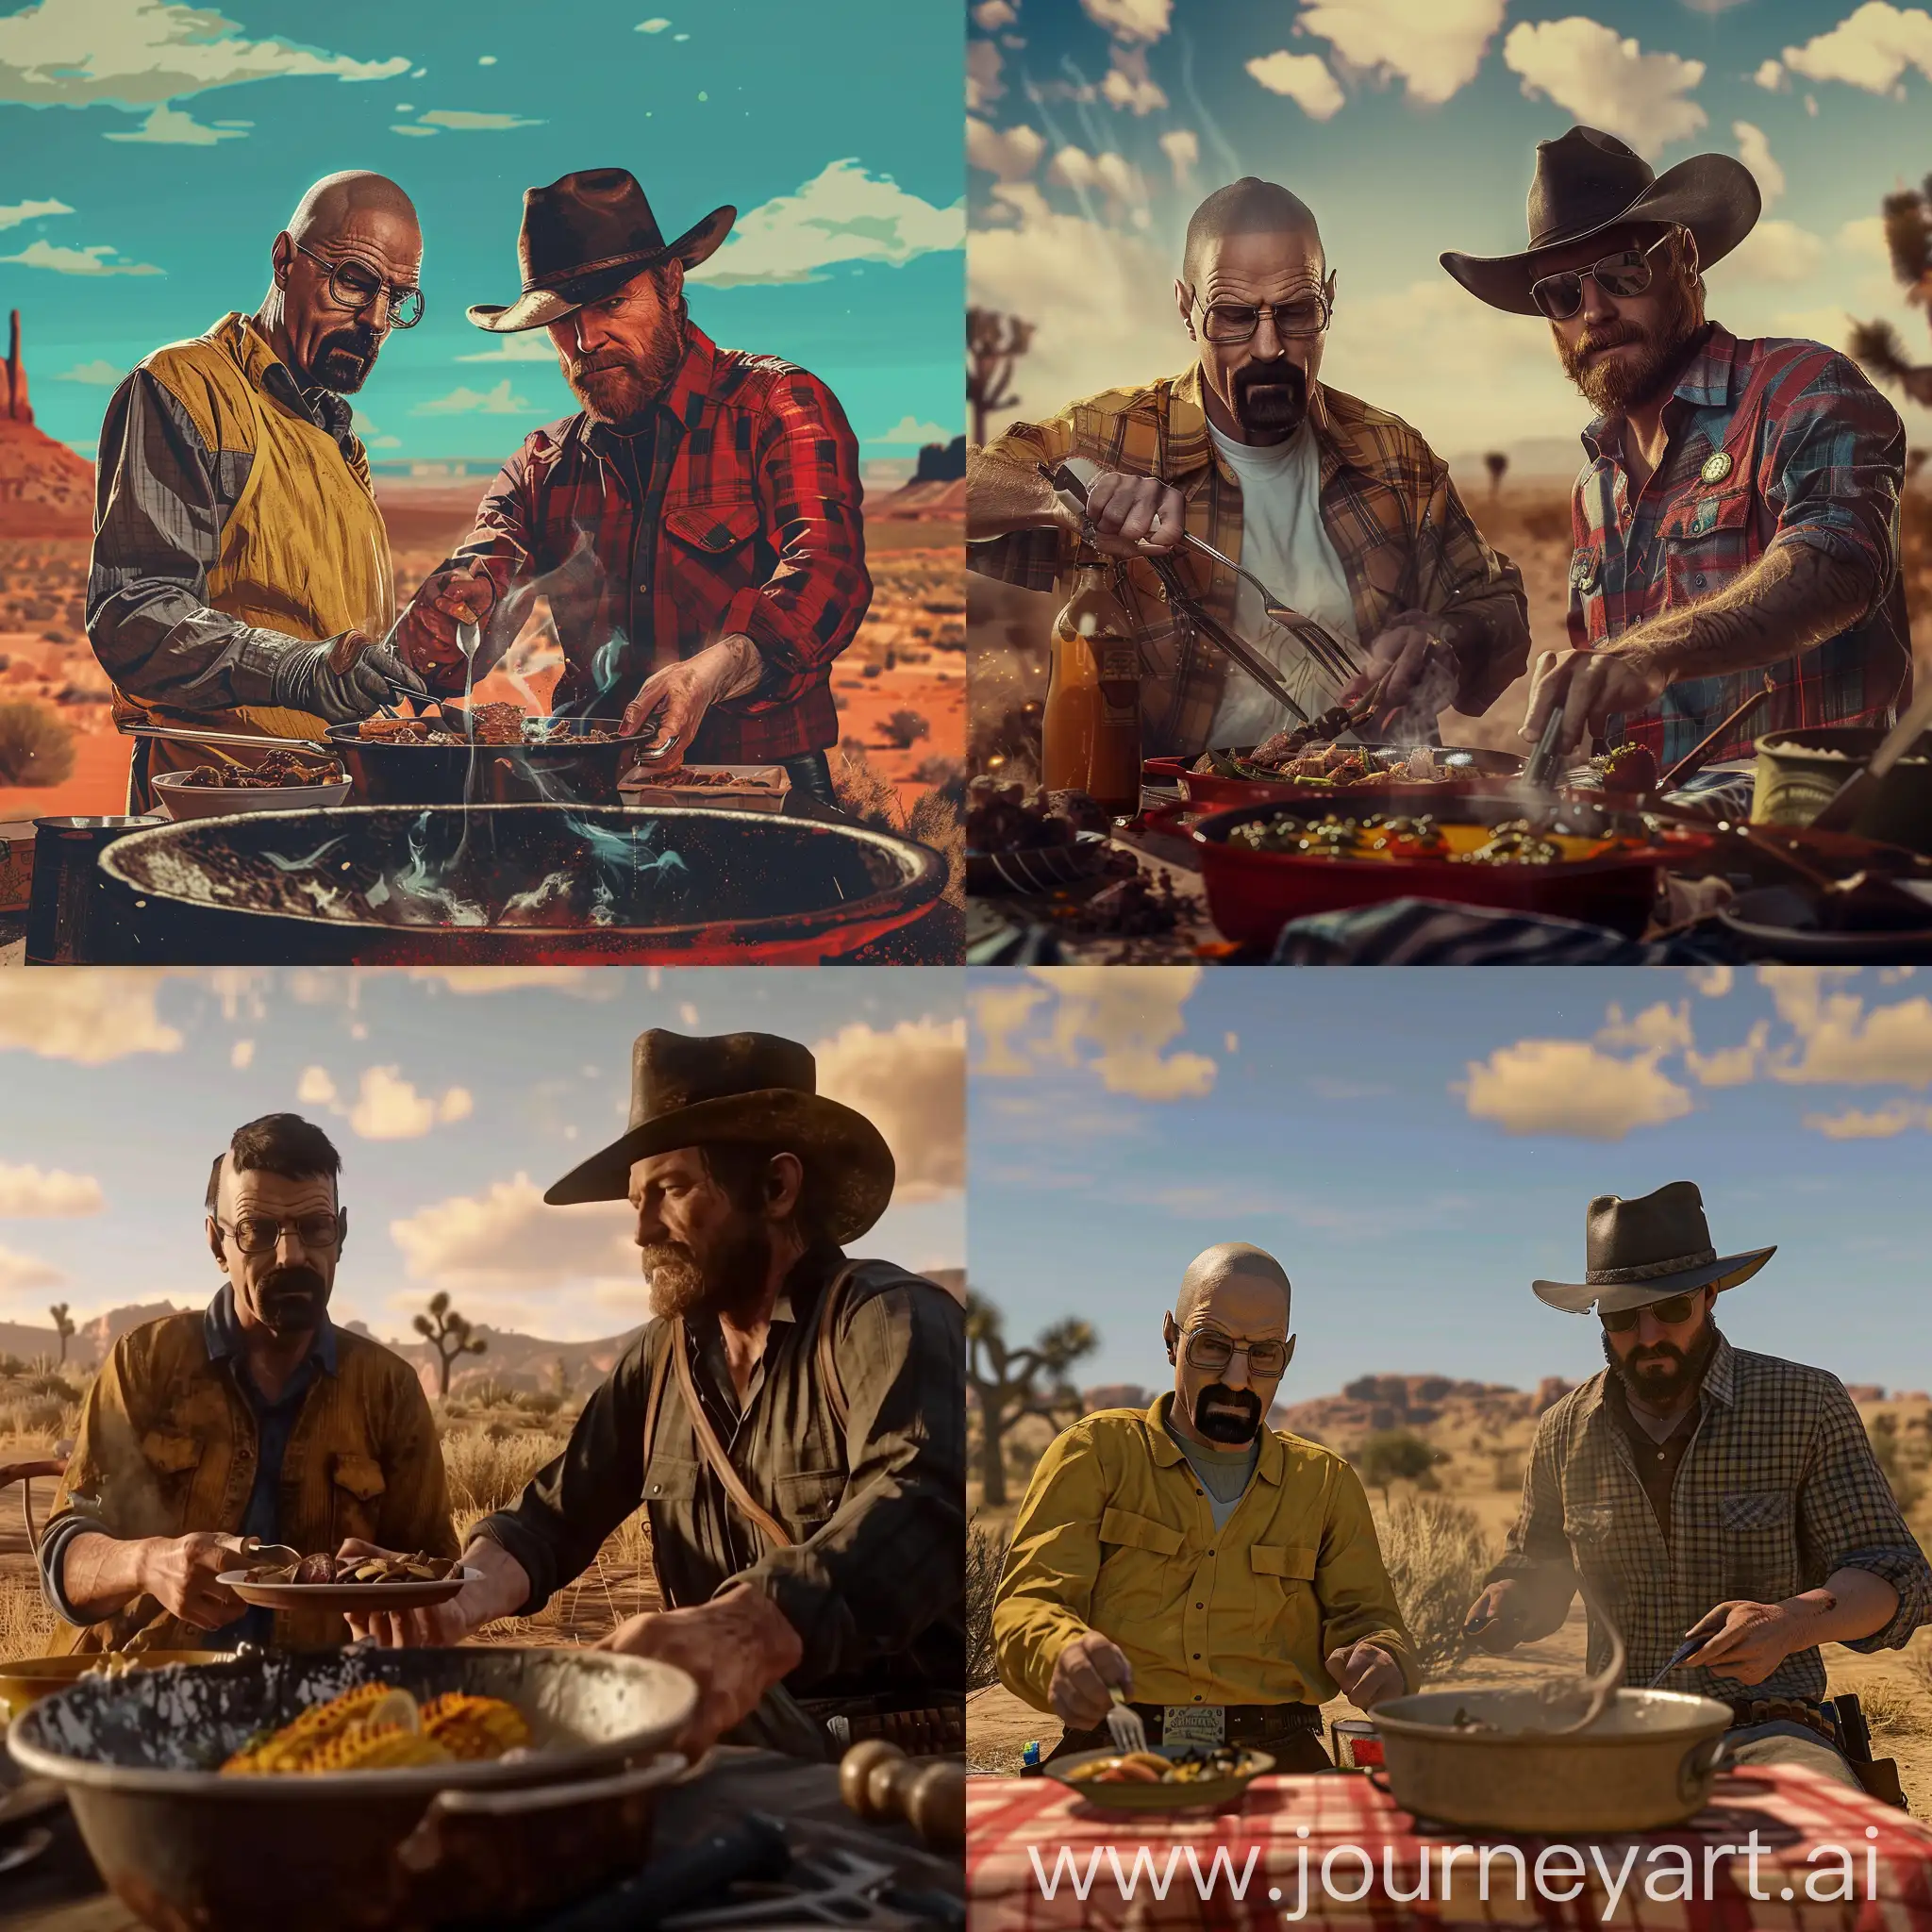 Walter-White-and-Arthur-Morgan-Cooking-Together-in-the-Desert